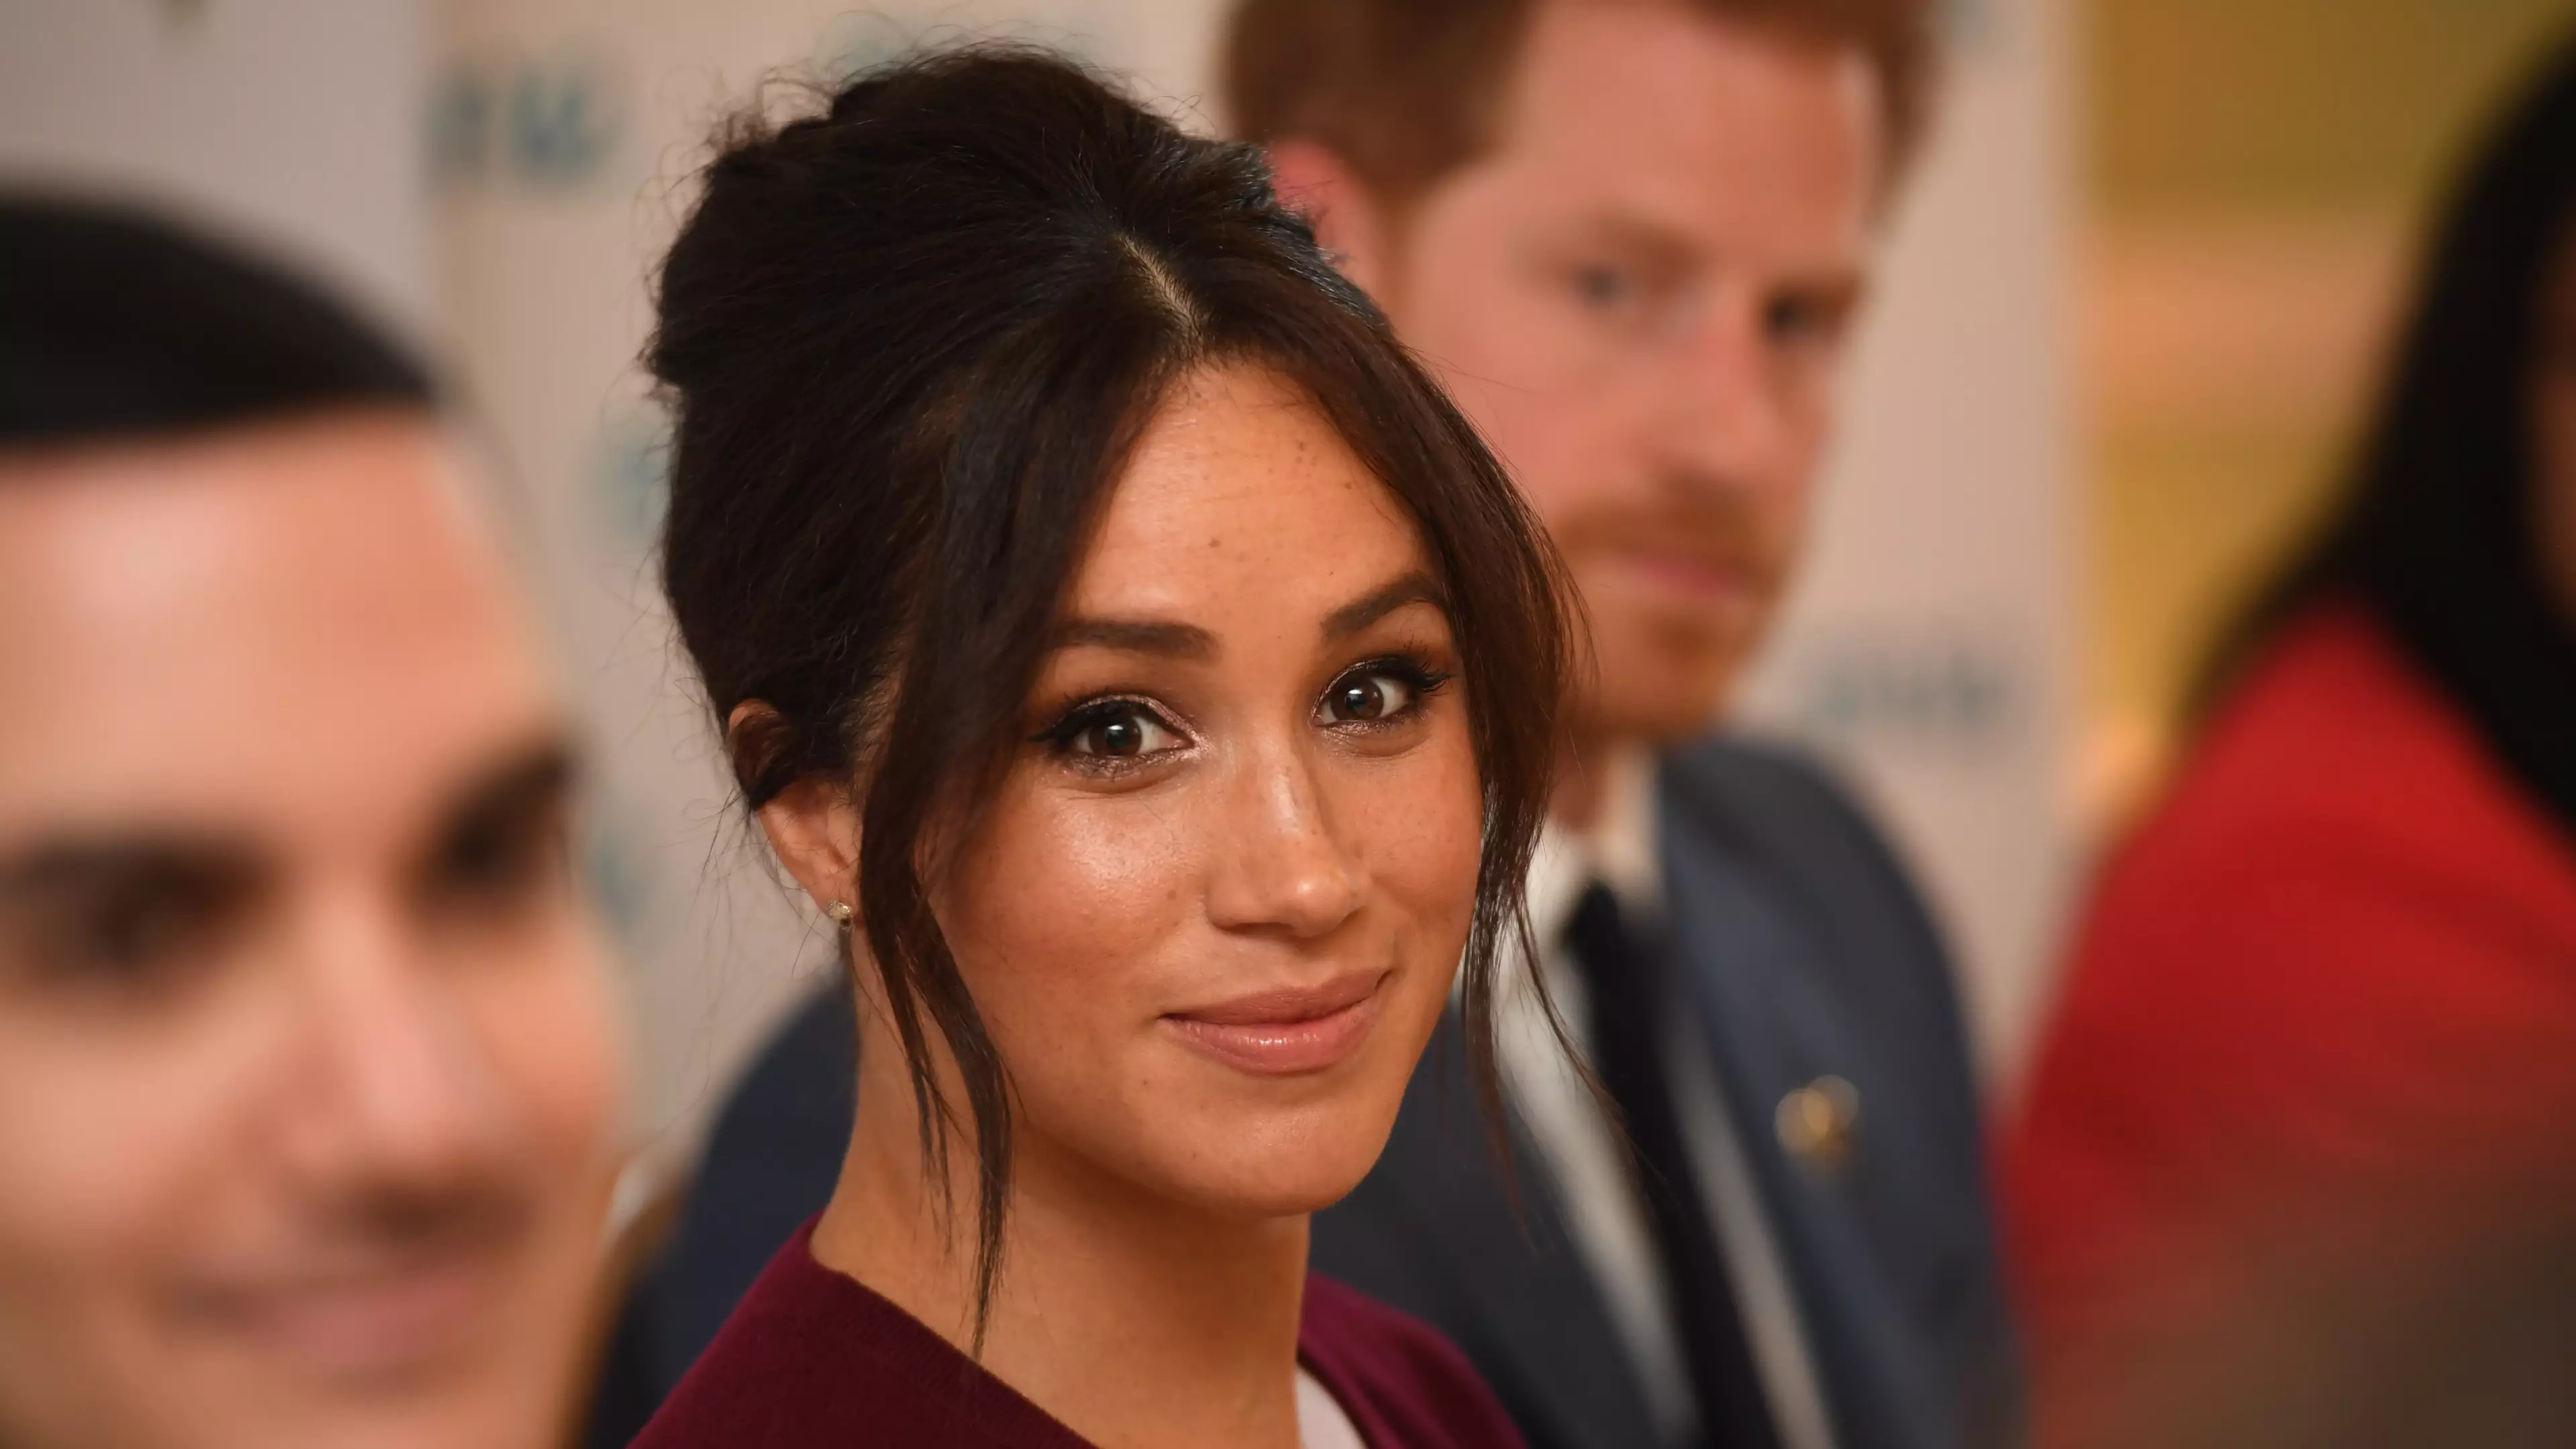 Meghan Markle Files 'Formal Complaint' Over Piers Morgan’s Mental Health Attack